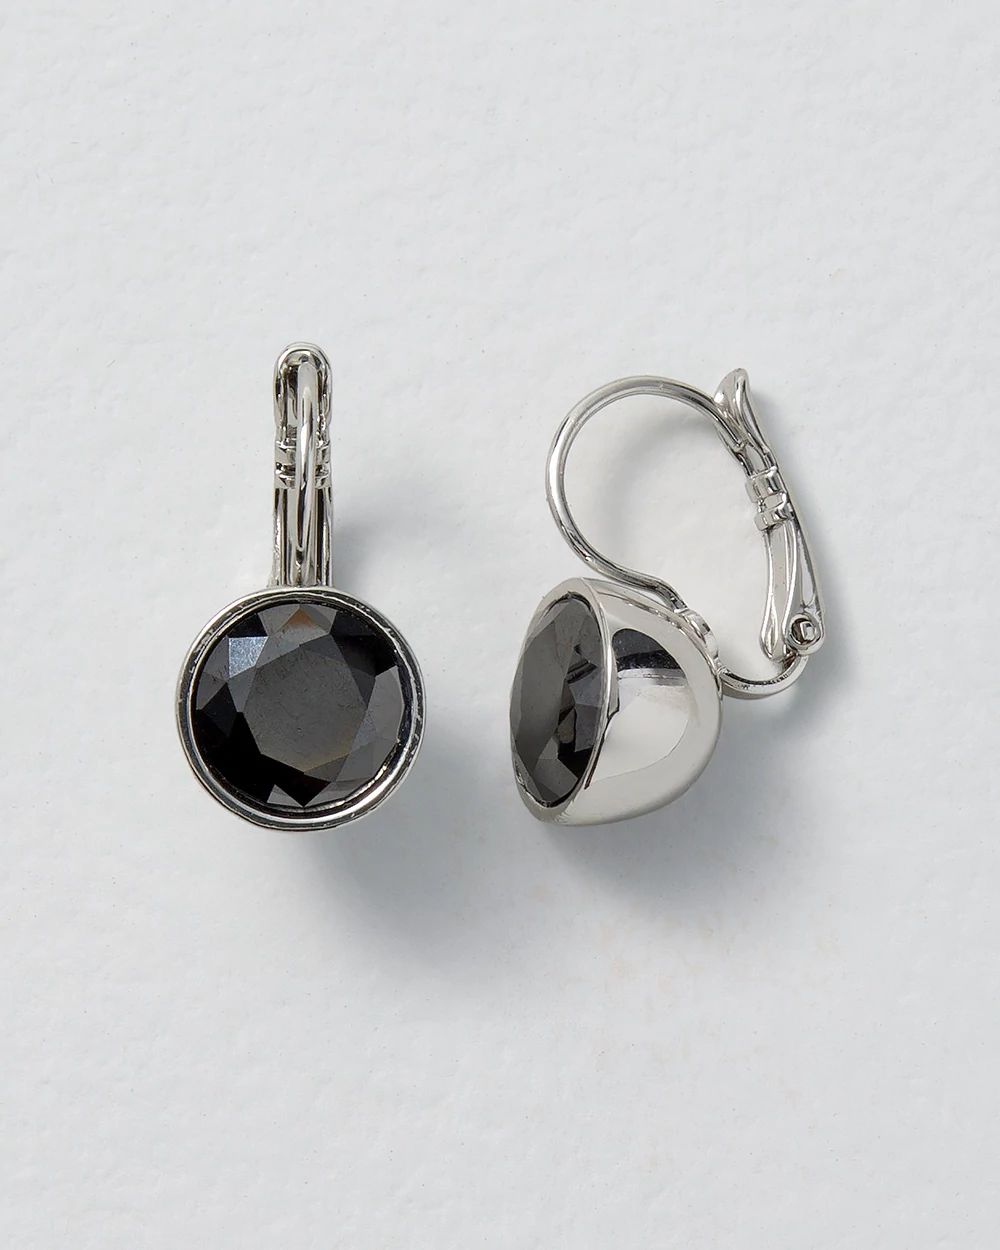 Jet Black Cubic Zirconia Drop Earrings click to view larger image.